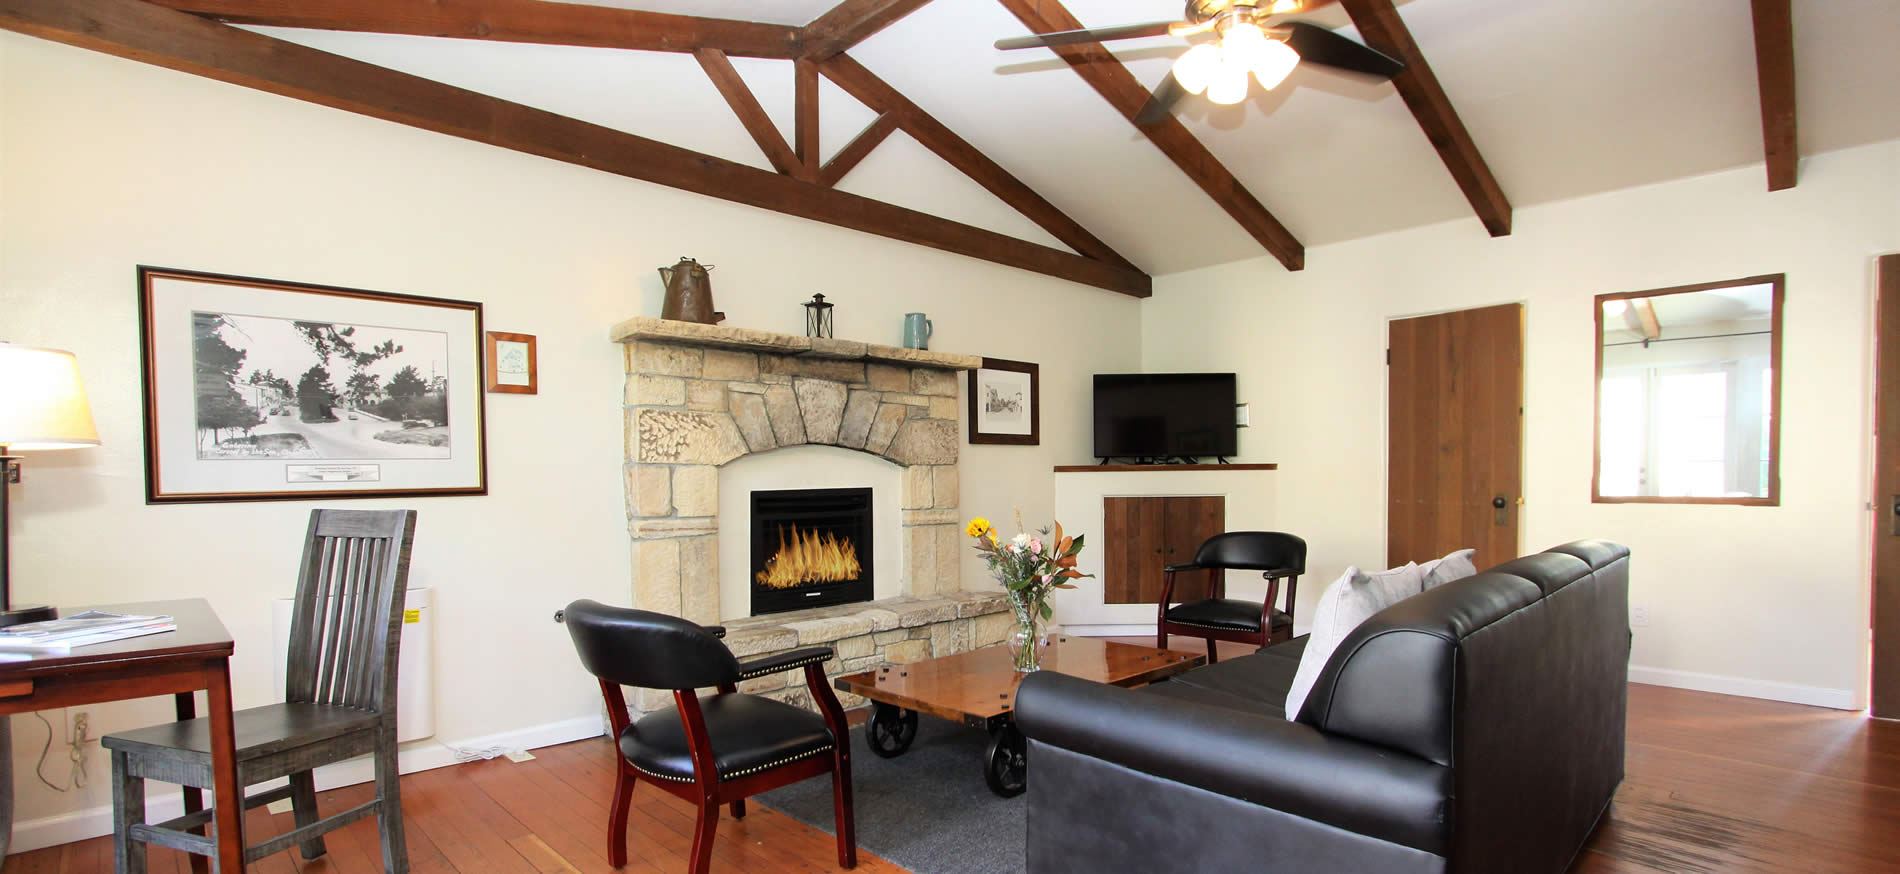 carmel vacation cottage living room with couch stone fireplace and chairs